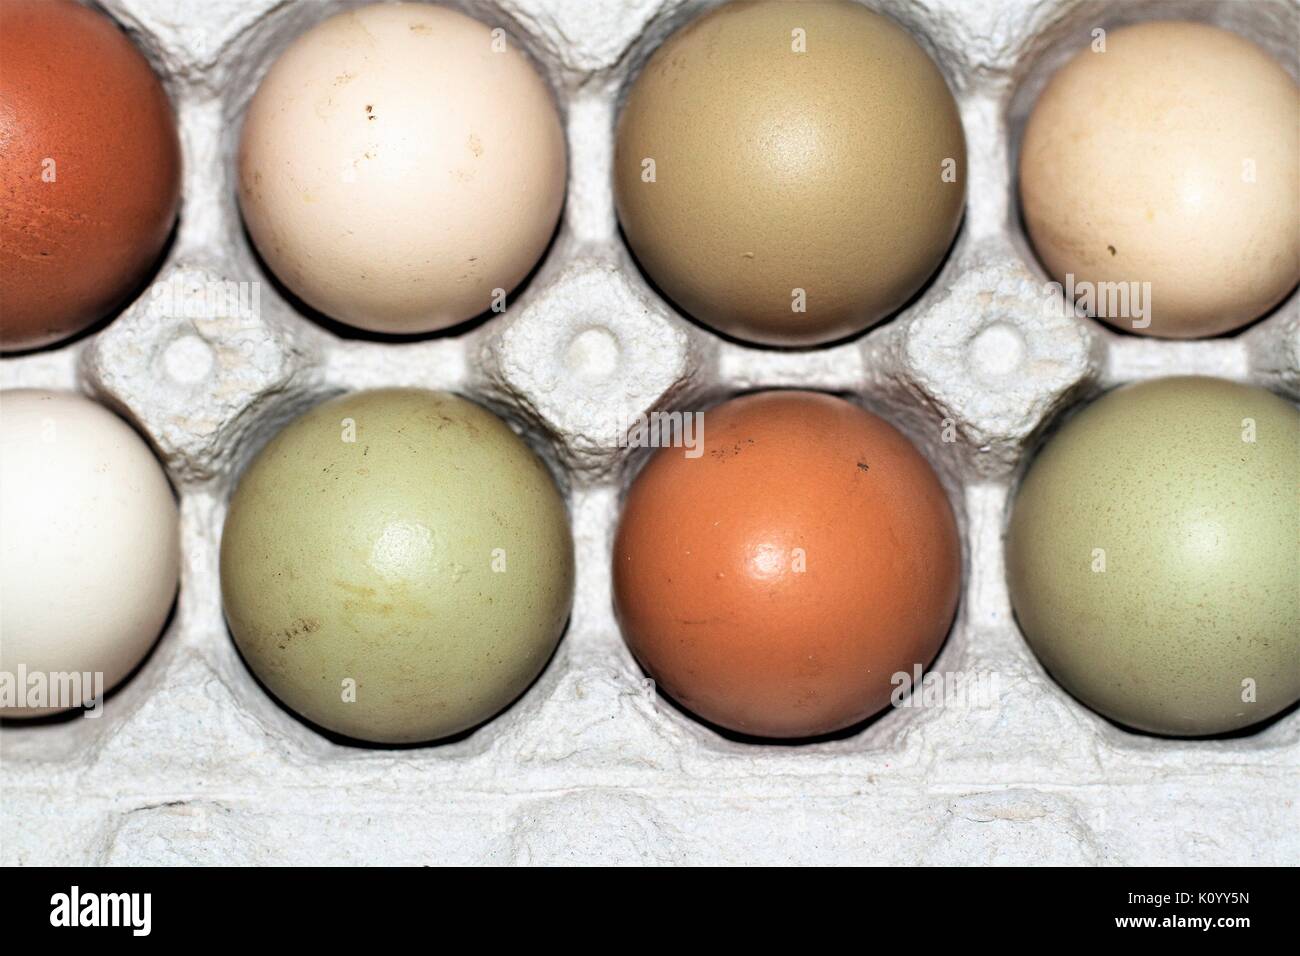 Variety of colored eggs in an egg carton Stock Photo